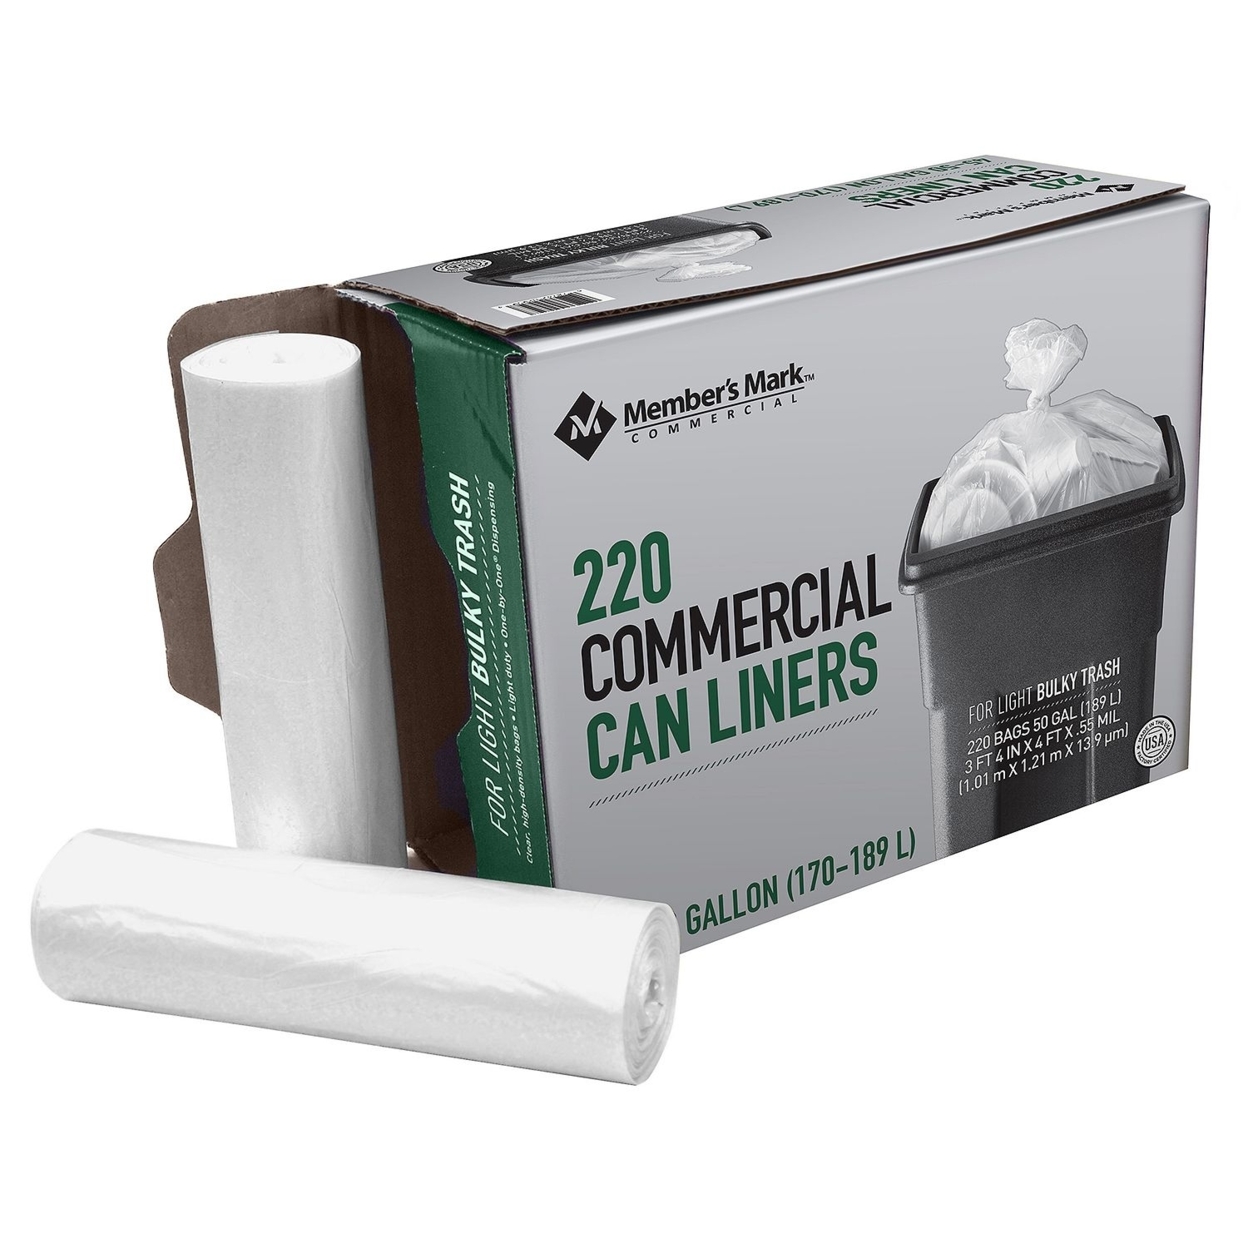 Member's Mark Commercial Can Liners, 220 Count